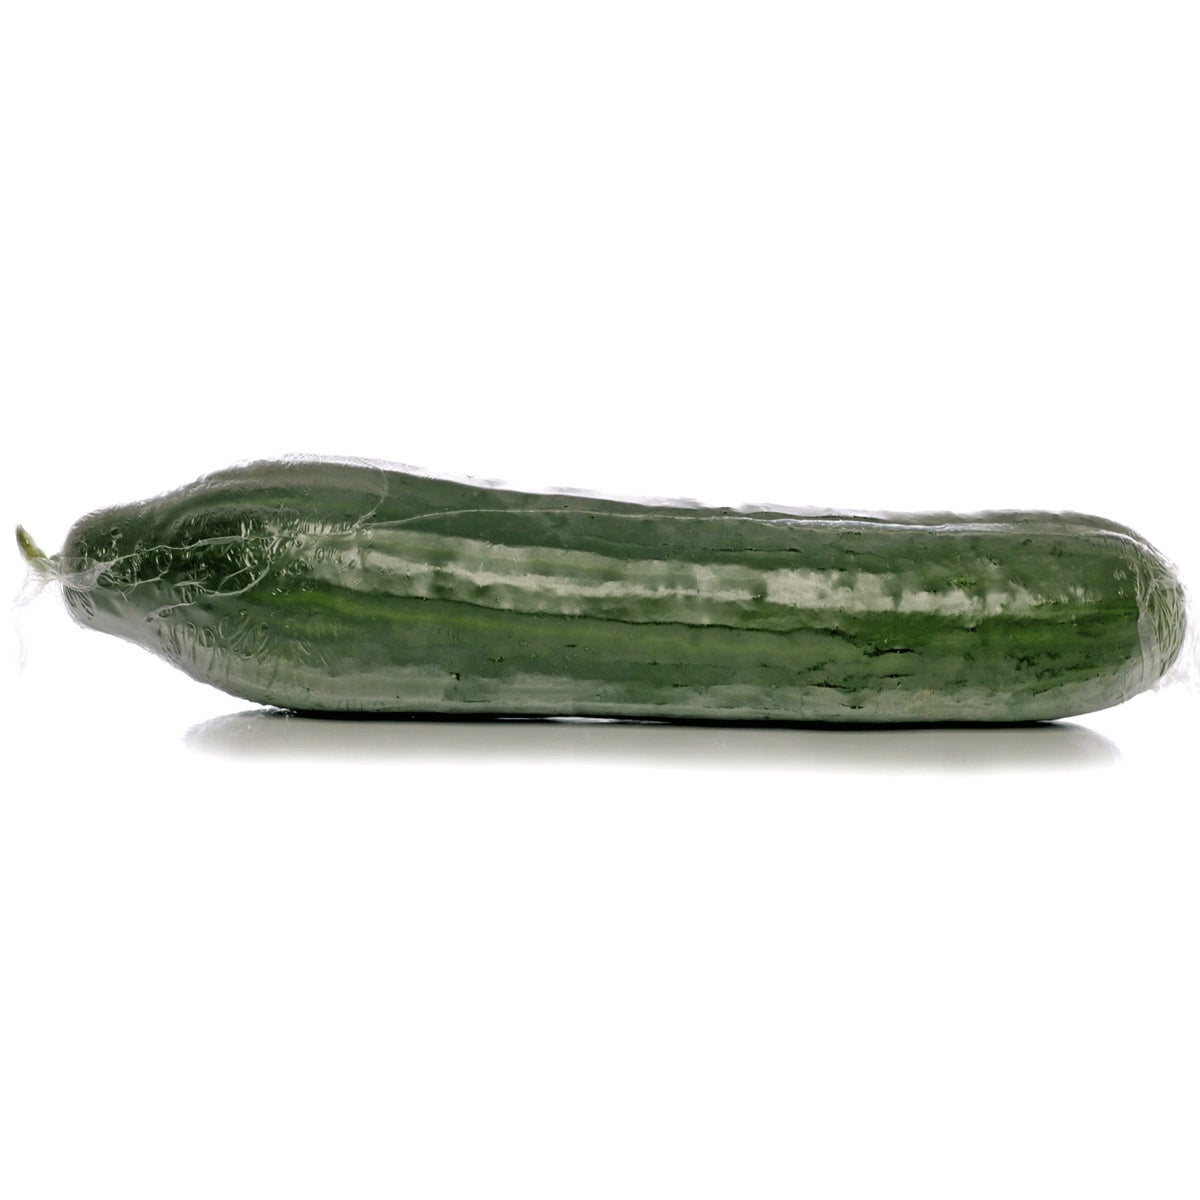 https://static.independent.co.uk/s3fs-public/thumbnails/image/2012/11/21/17/pg-42-cucumber-1-alamy.jpg?width=1200&height=1200&fit=crop